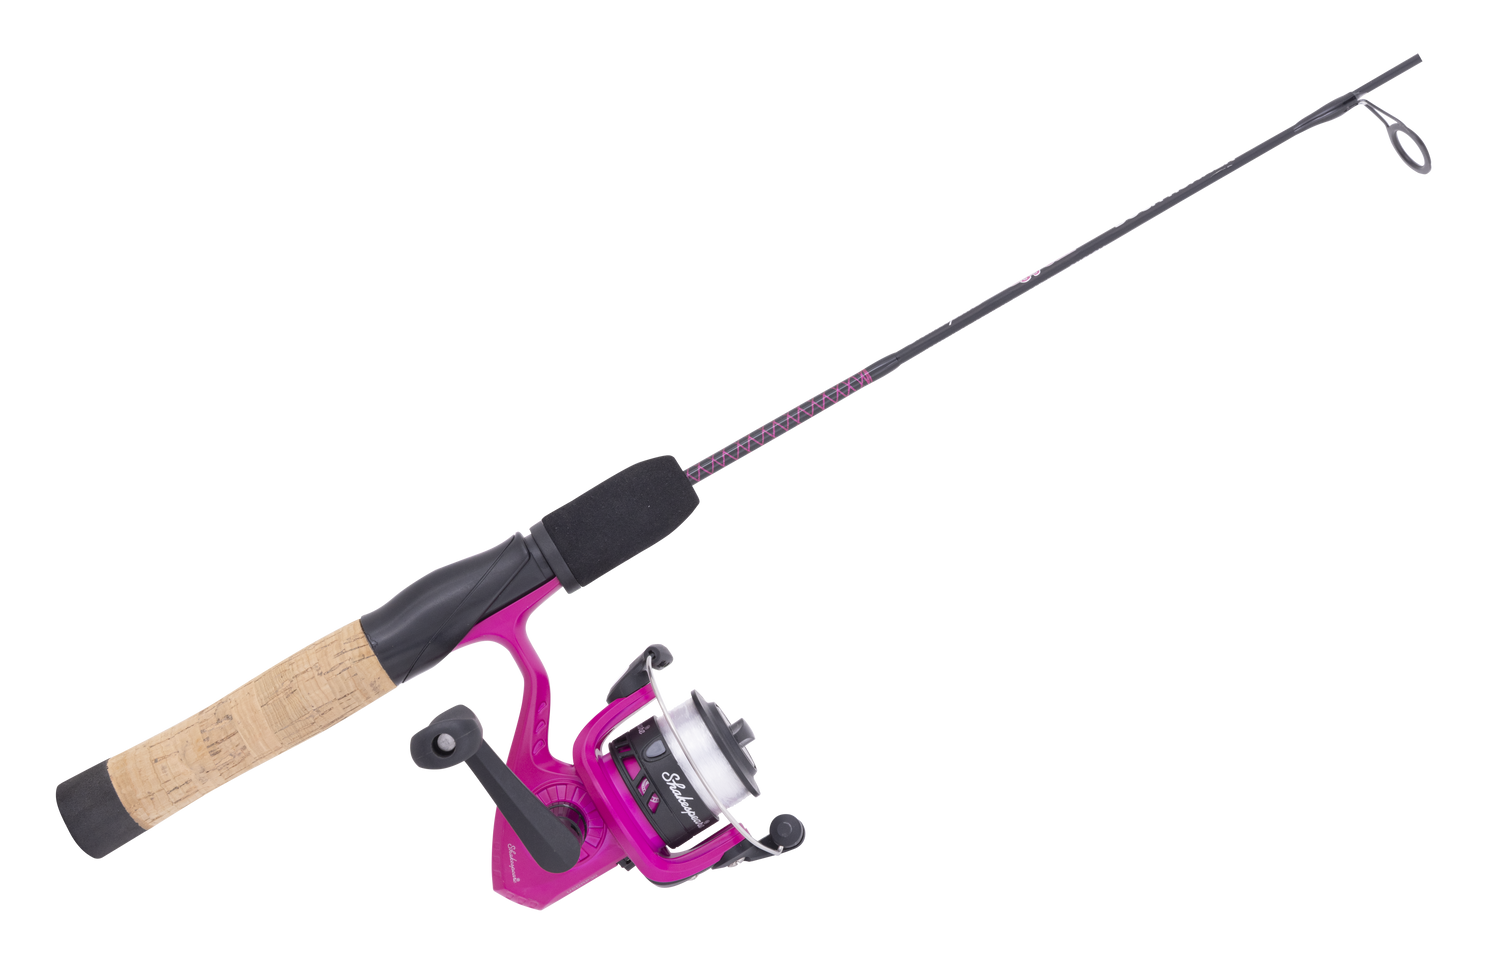 The new ugly stik dock runner is pretty - Catfish and Carp